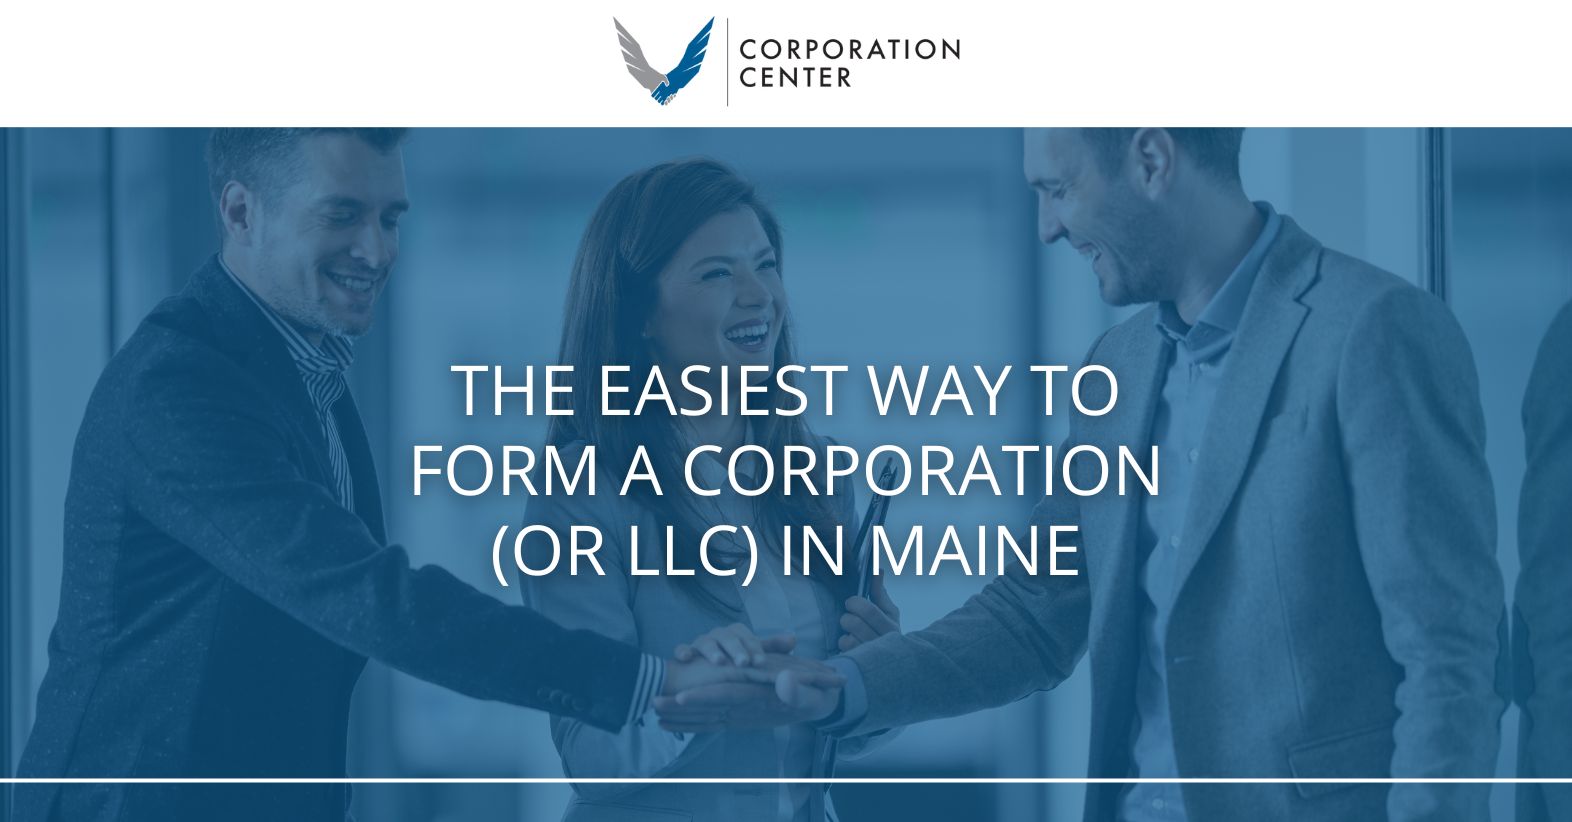 Form a Corporation (or LLC) in Maine